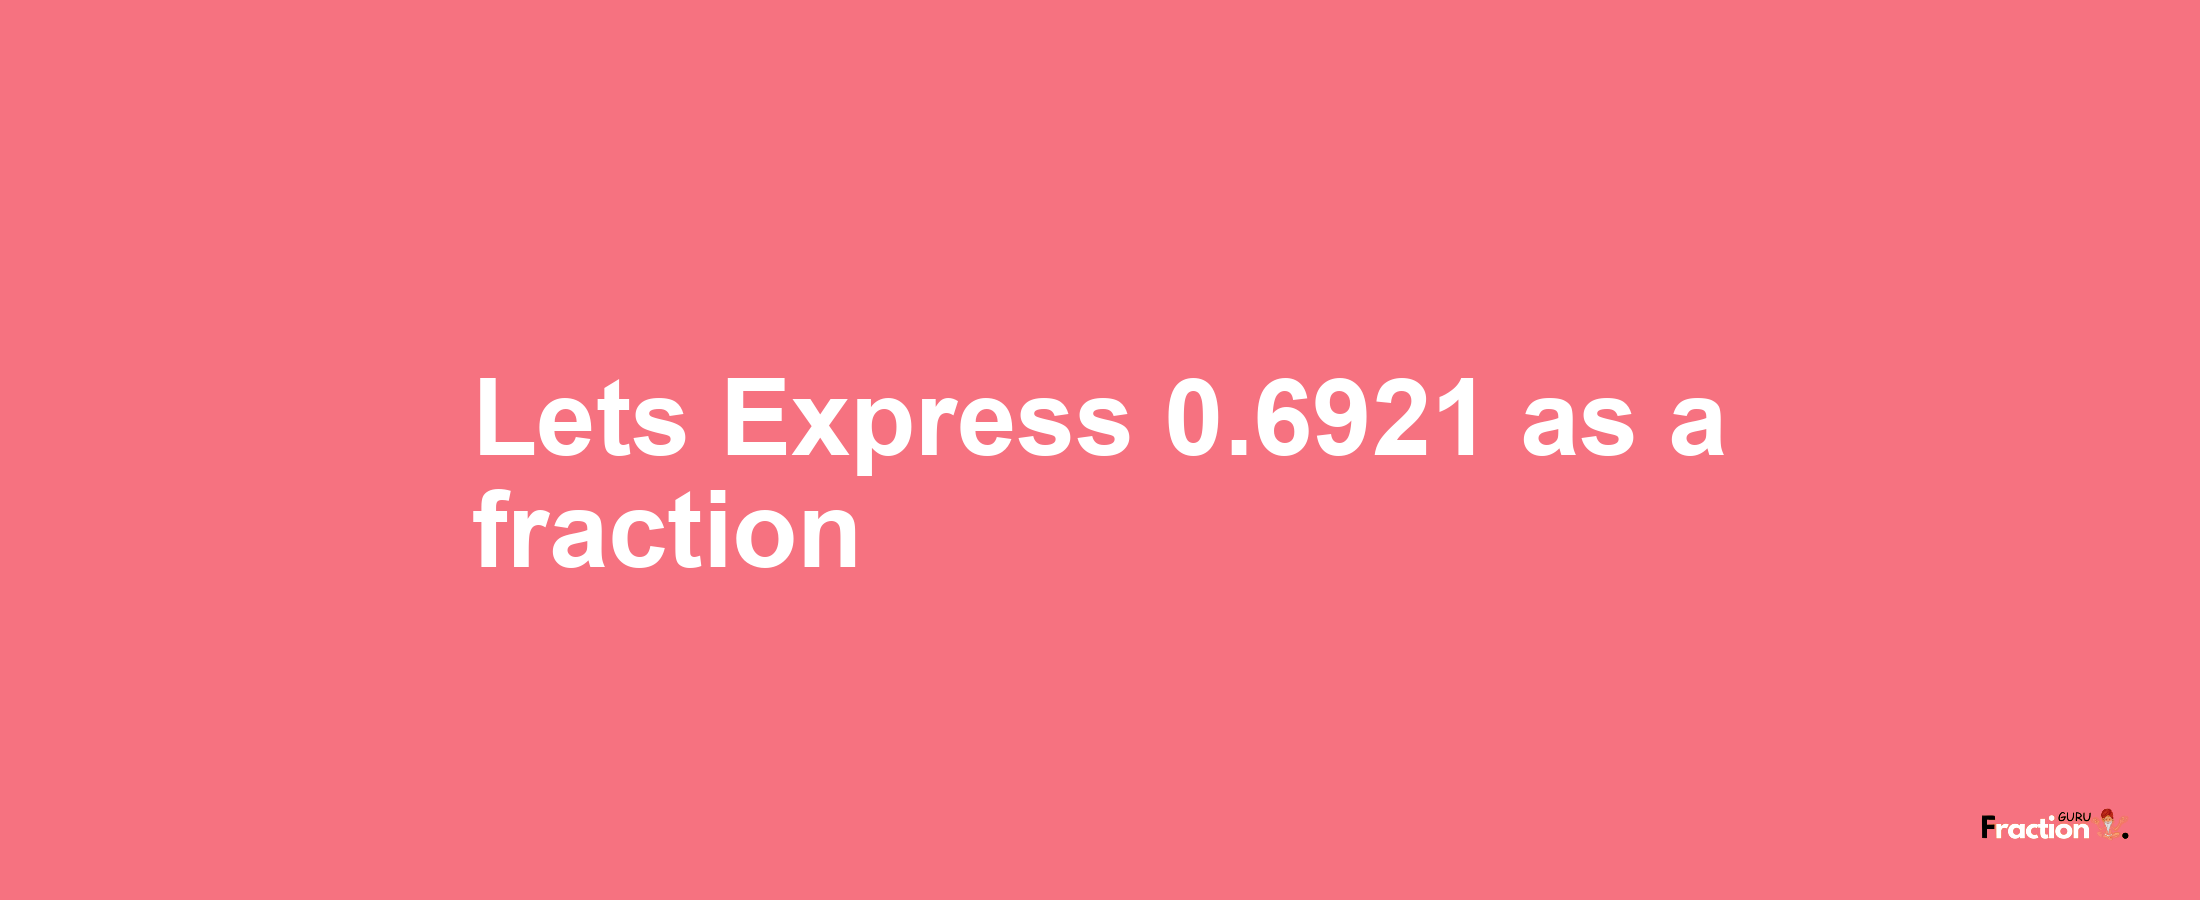 Lets Express 0.6921 as afraction